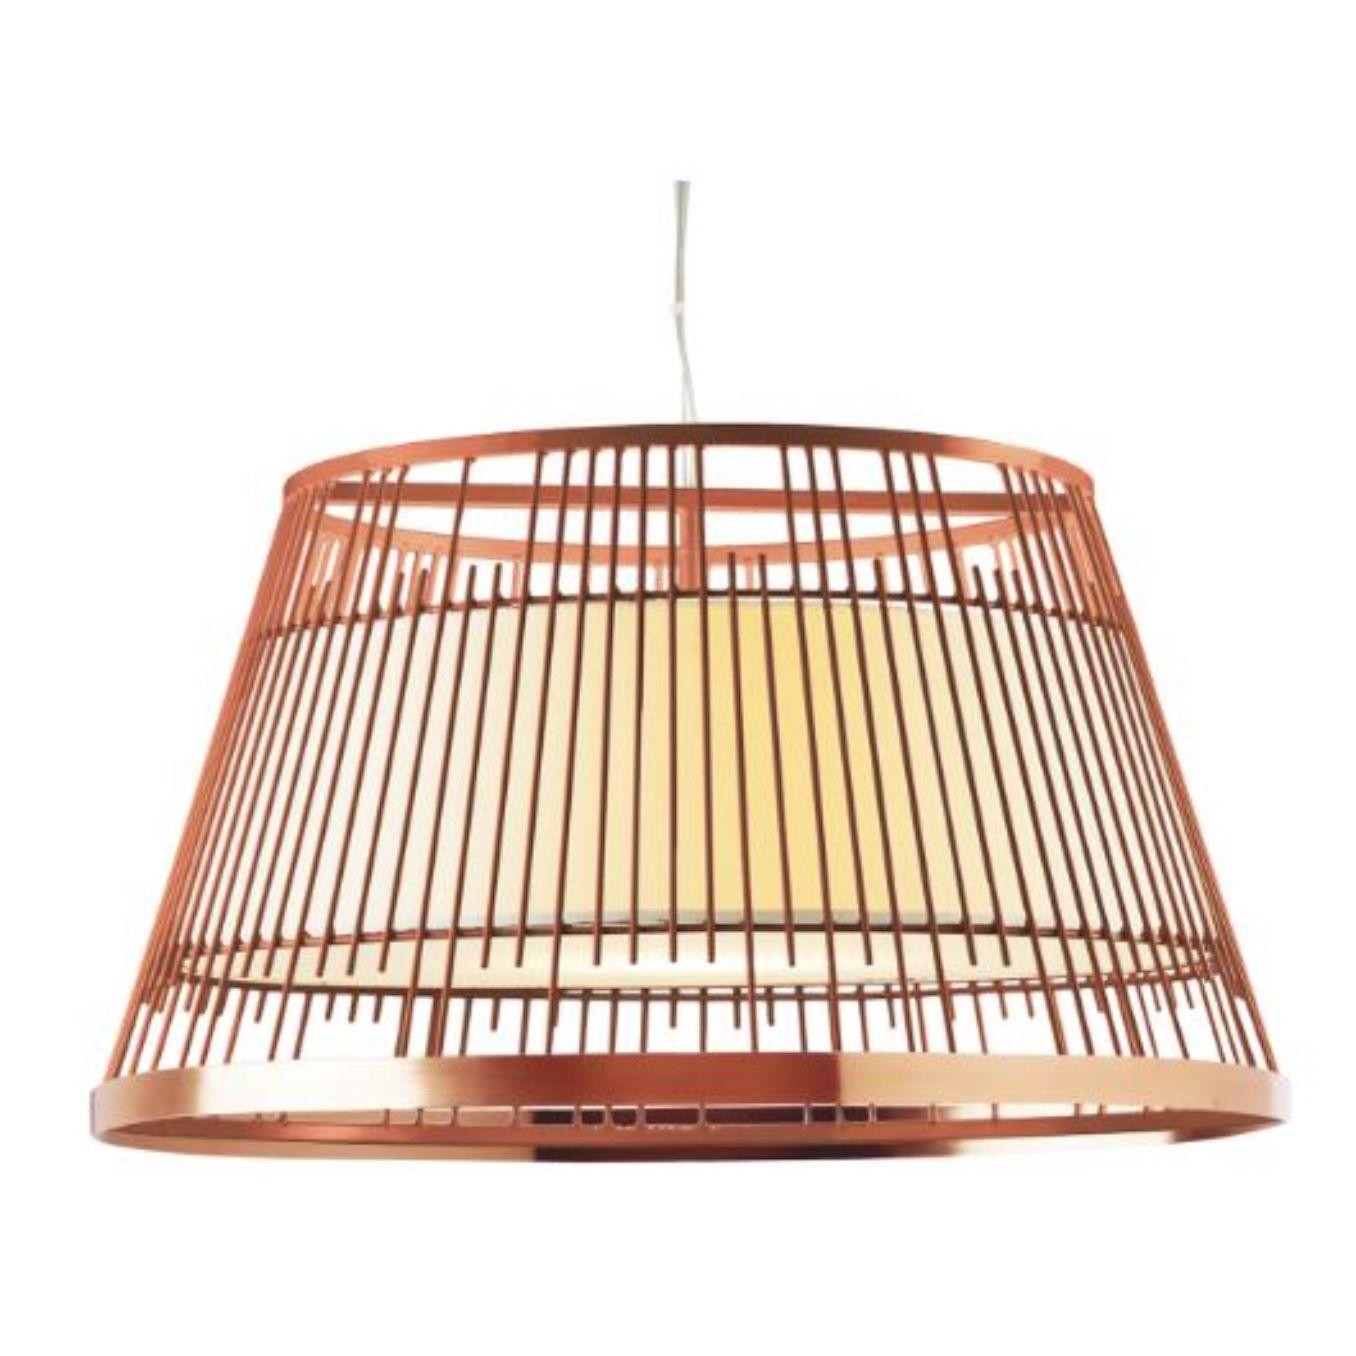 Salmon up I suspension lamp with copper ring by Dooq
Dimensions: W 68 x D 68 x H 39 cm
Materials: lacquered metal, polished or brushed metal, copper.
Abat-jour: cotton
Also available in different colors and materials.